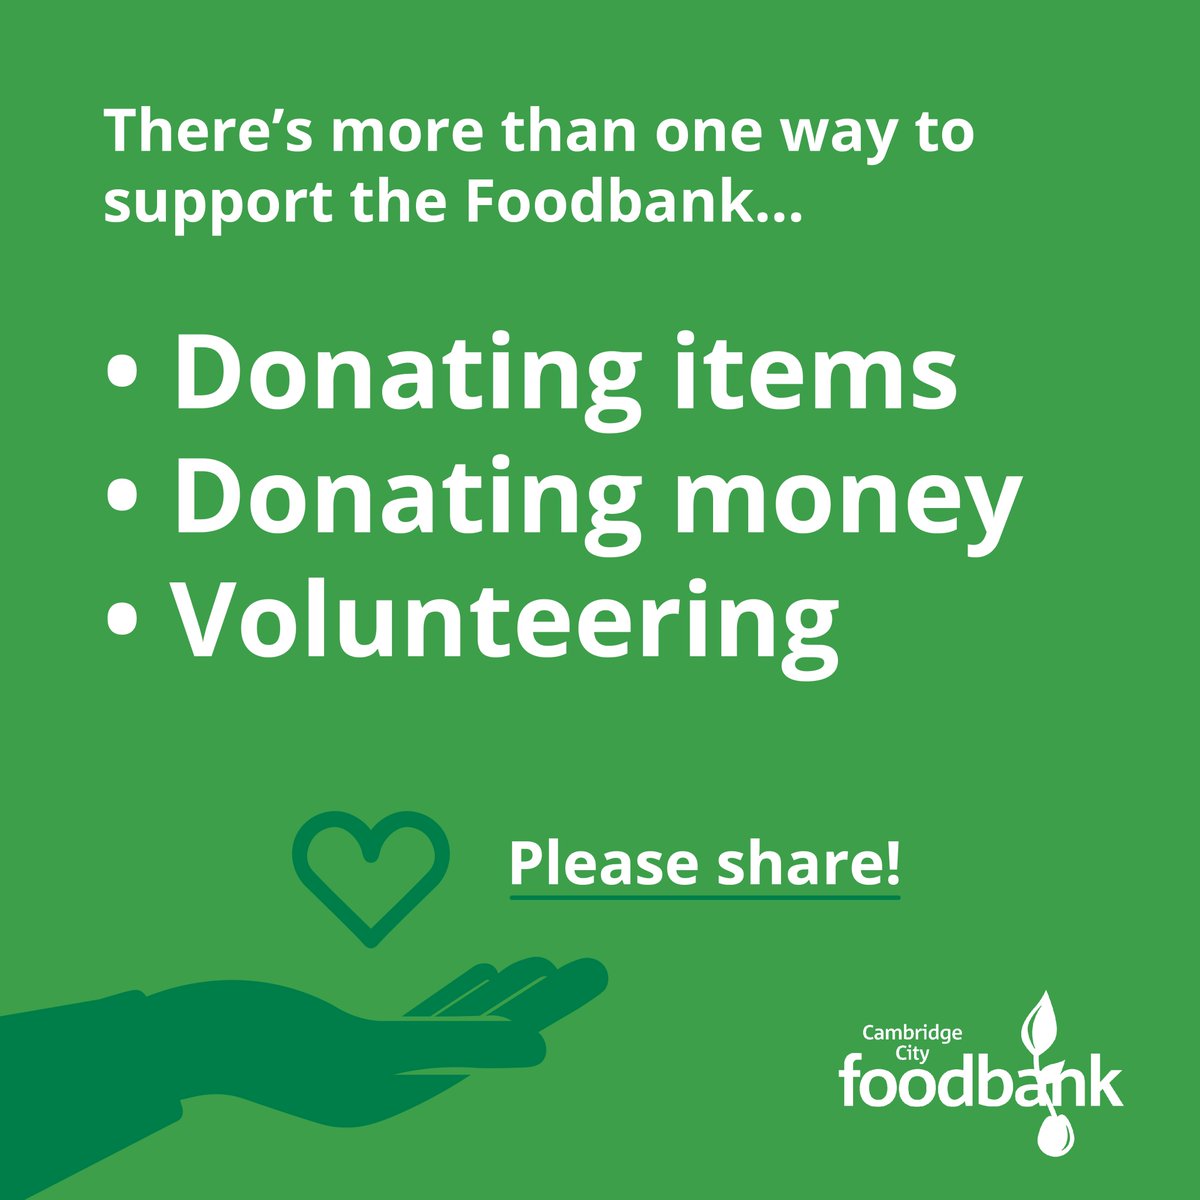 So far this year, we’ve supported 10% more visitors compared to the same timeframe last year. The #CostOfLiving may feel like old news, but people are still struggling and still need our help. Learn more about the help you can give: cambridgecity.foodbank.org.uk/give-help/